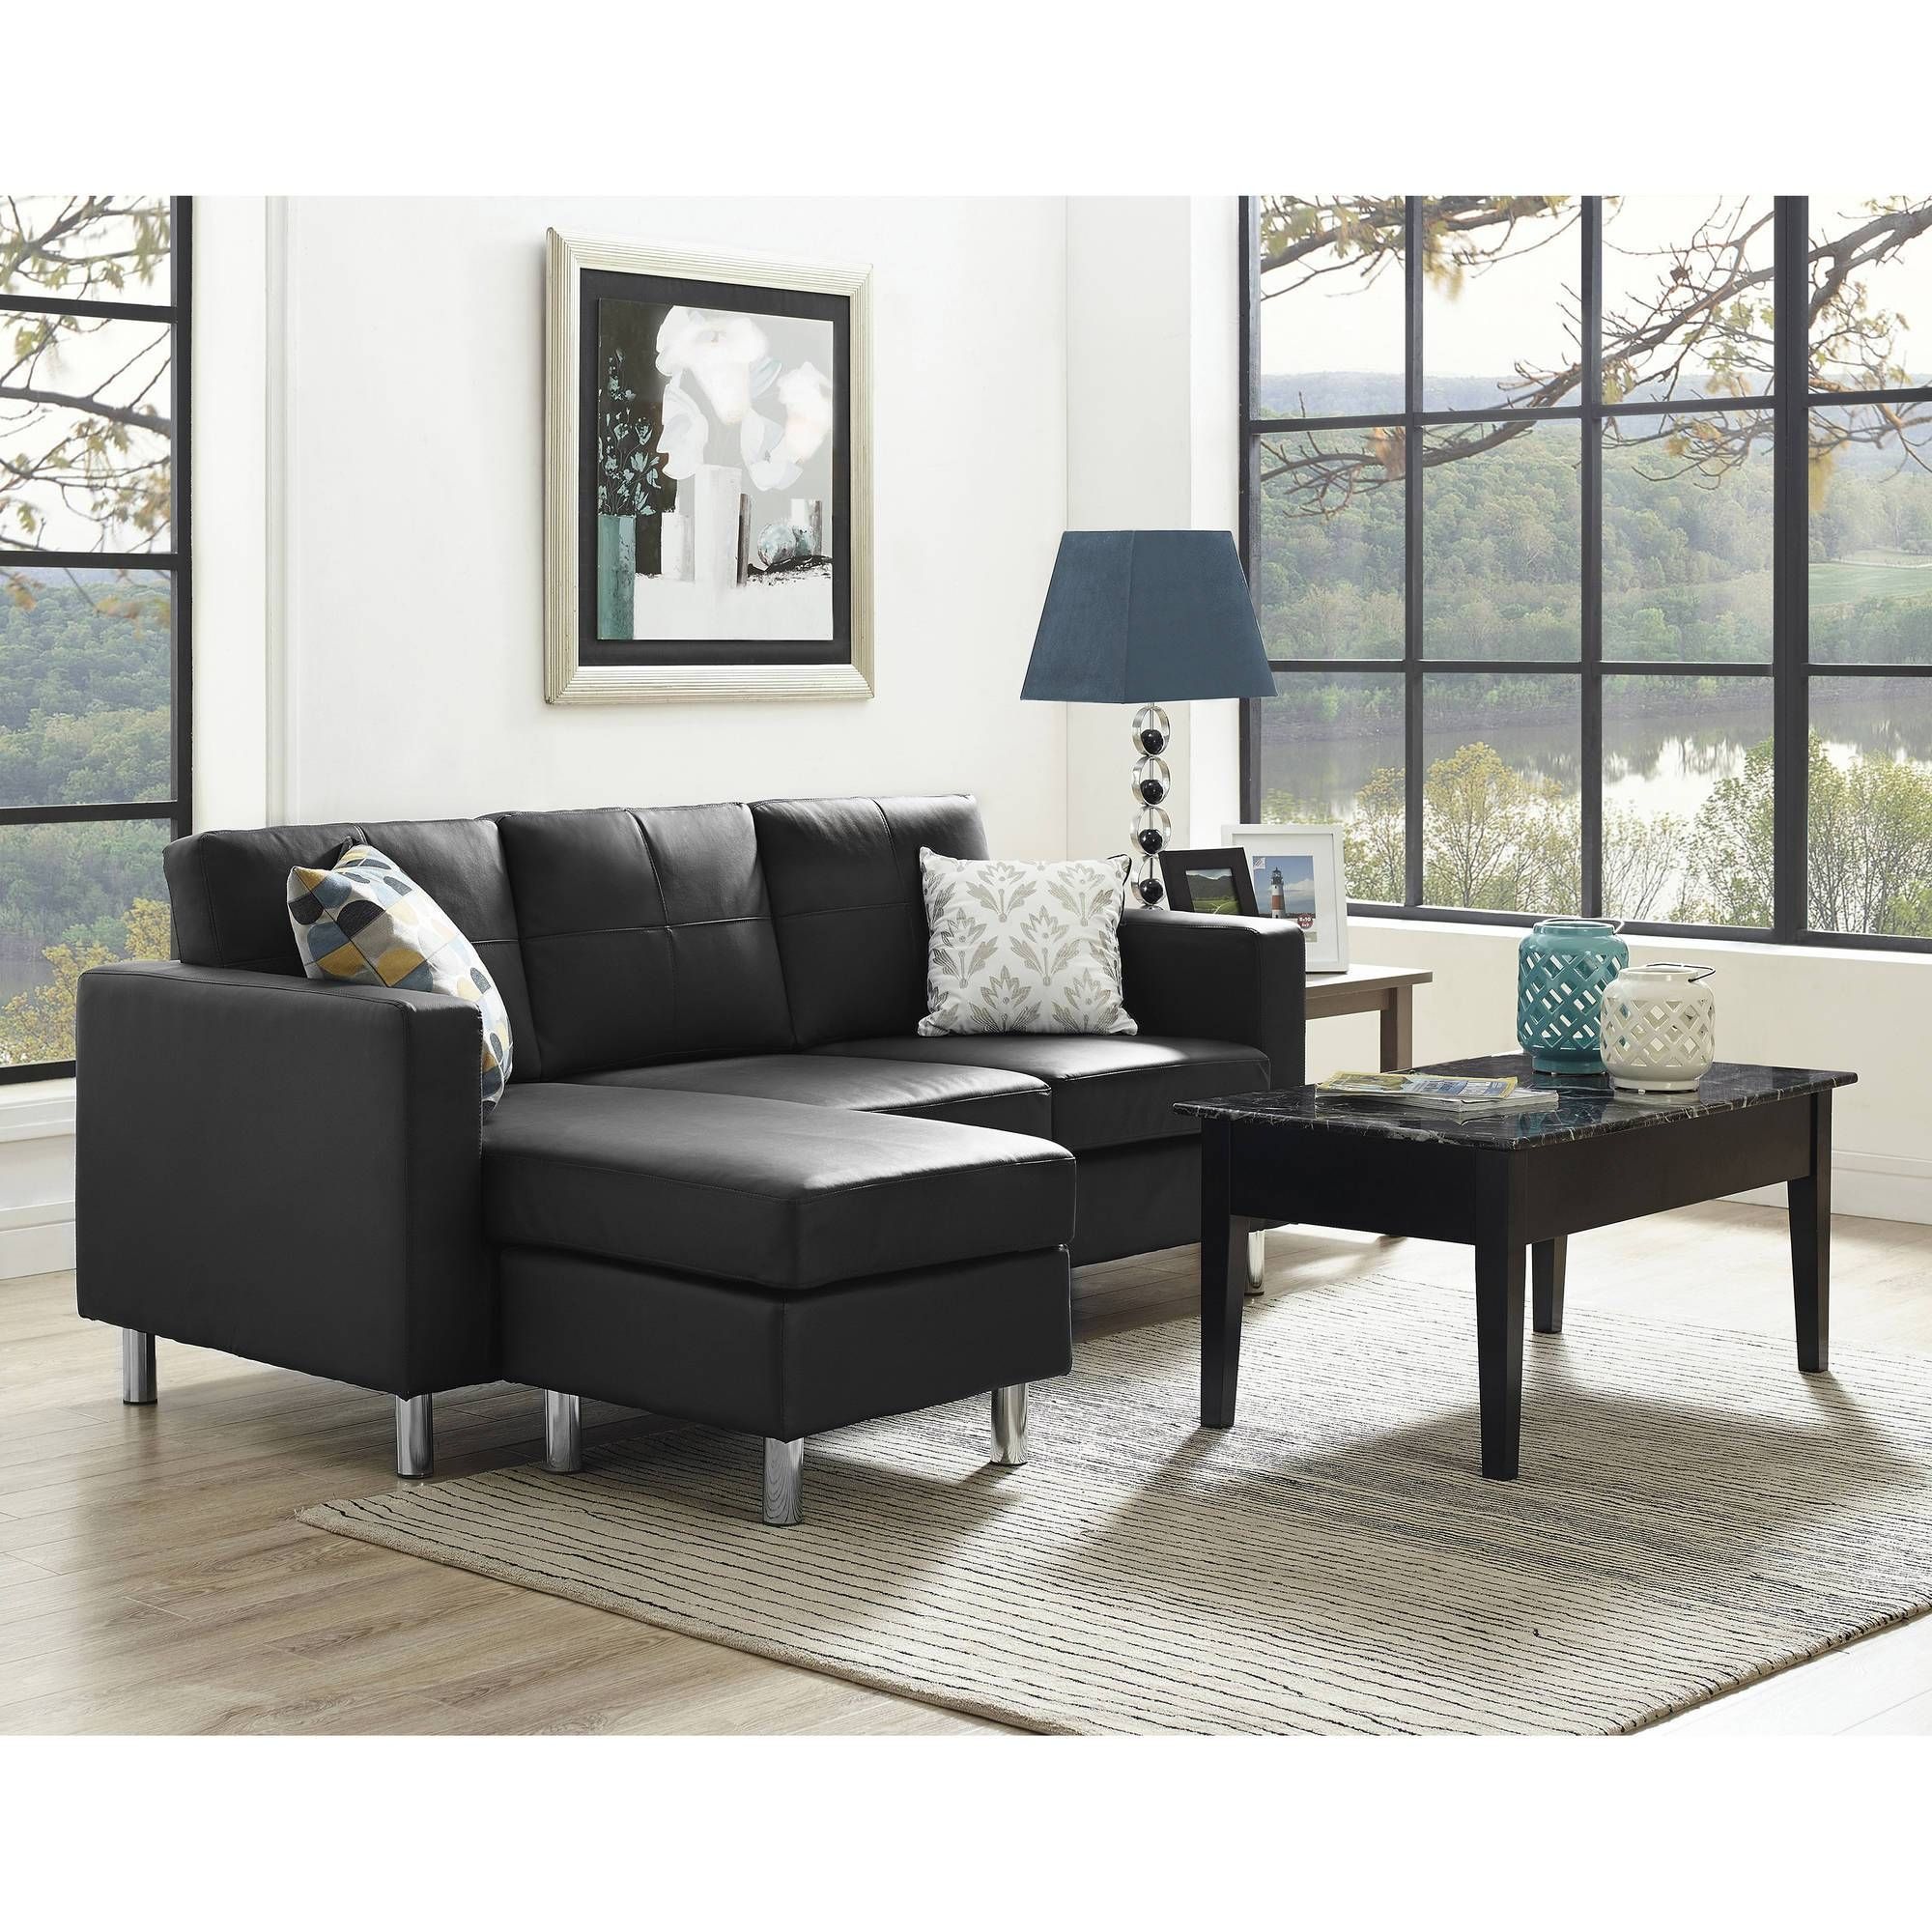 Dorel Living Small Spaces Configurable Sectional Sofa, Multiple Intended For Narrow Sectional Sofas (View 1 of 15)